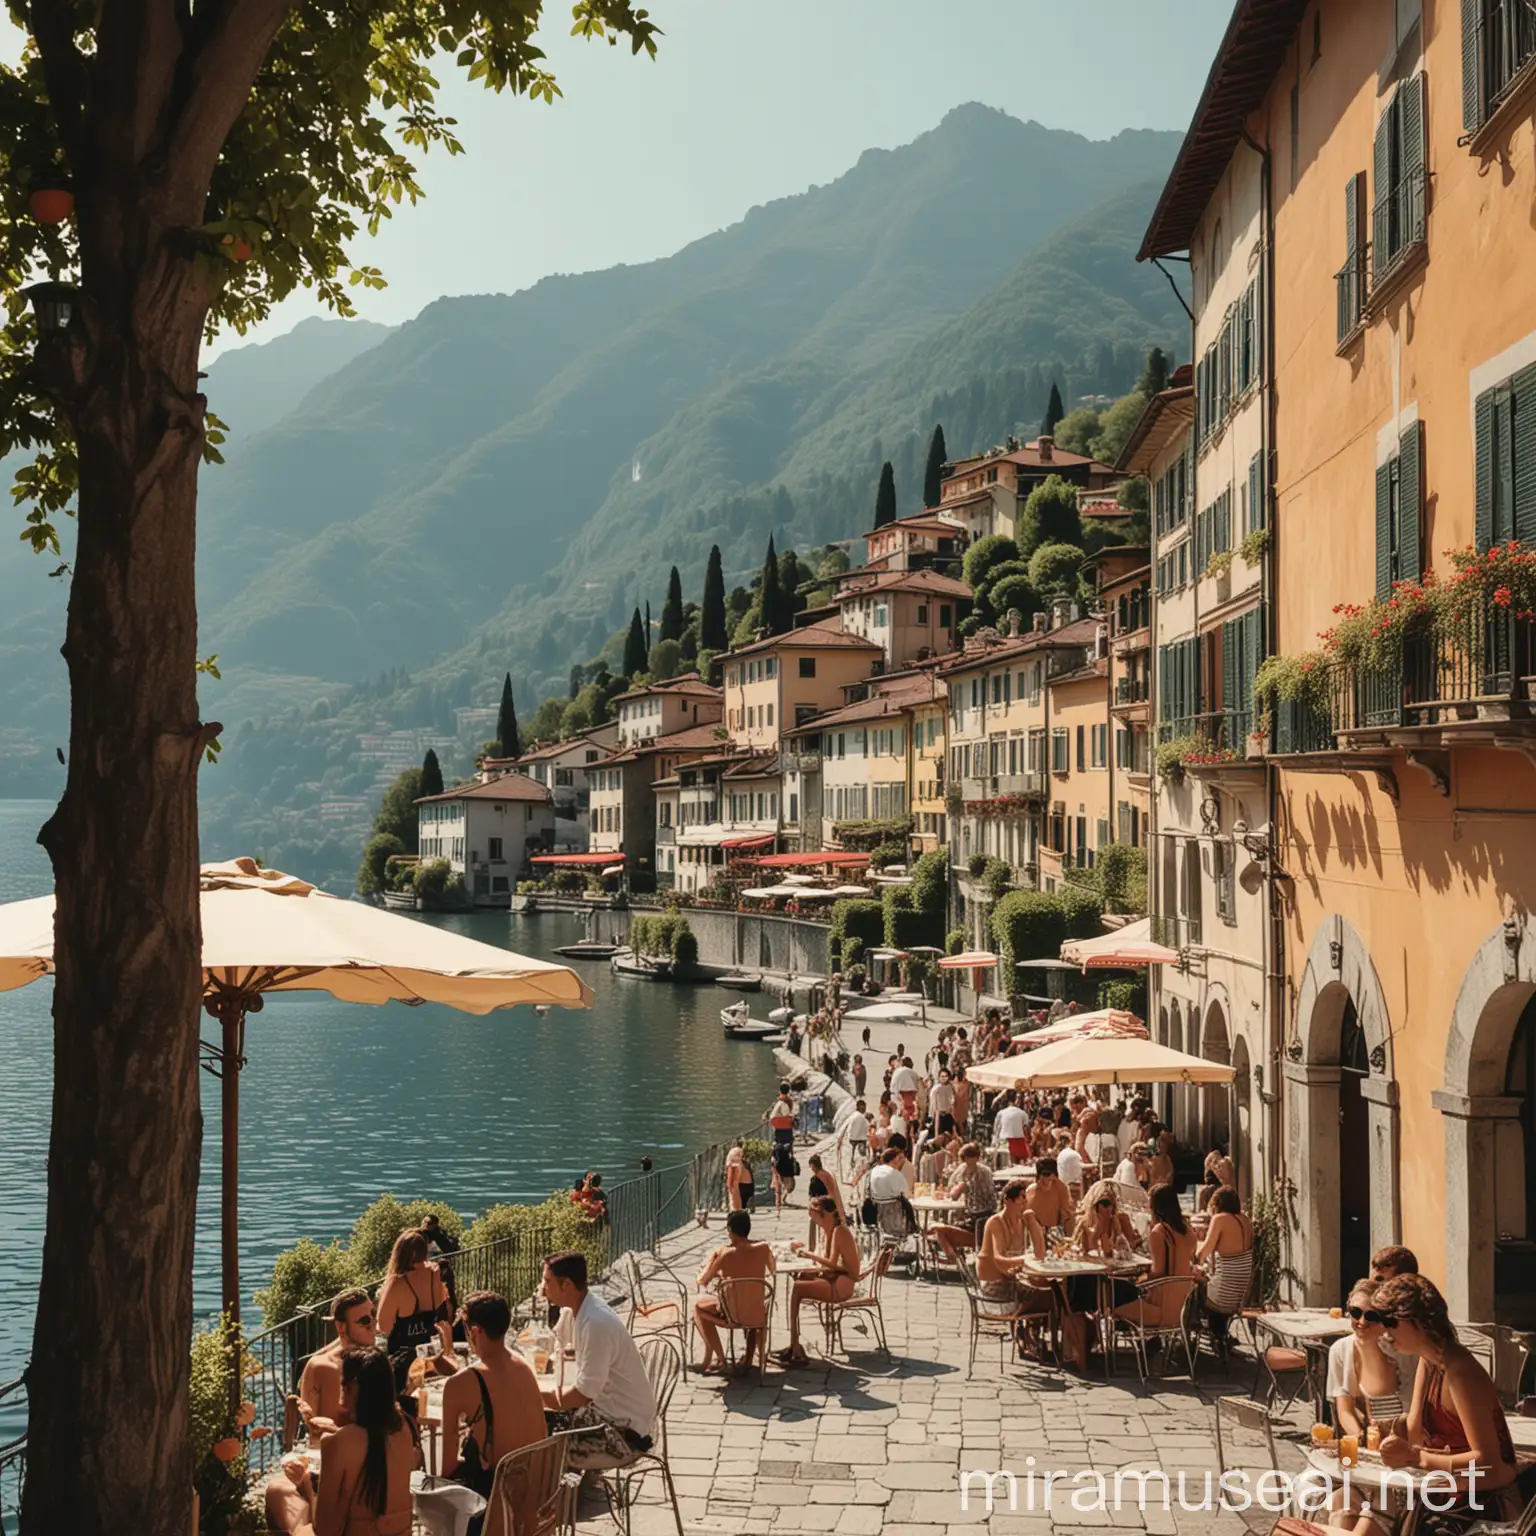 Lake Como Italy Gathering with People Enjoying Drinks and Oldschool Vibes